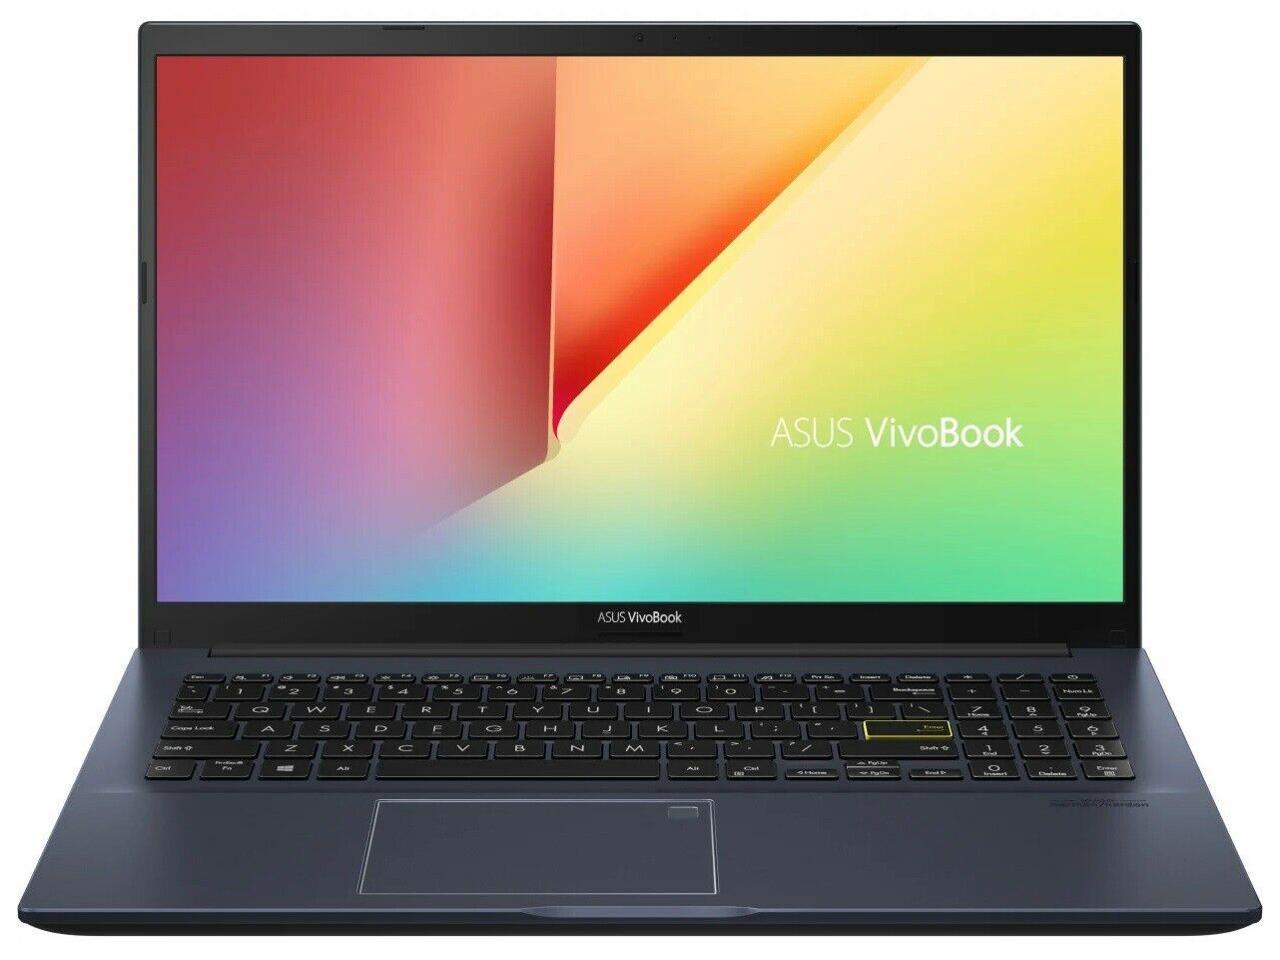 ASUS VivoBook 15.6in i3 8GB 256GB Notebook Laptop for $199.99 Shipped